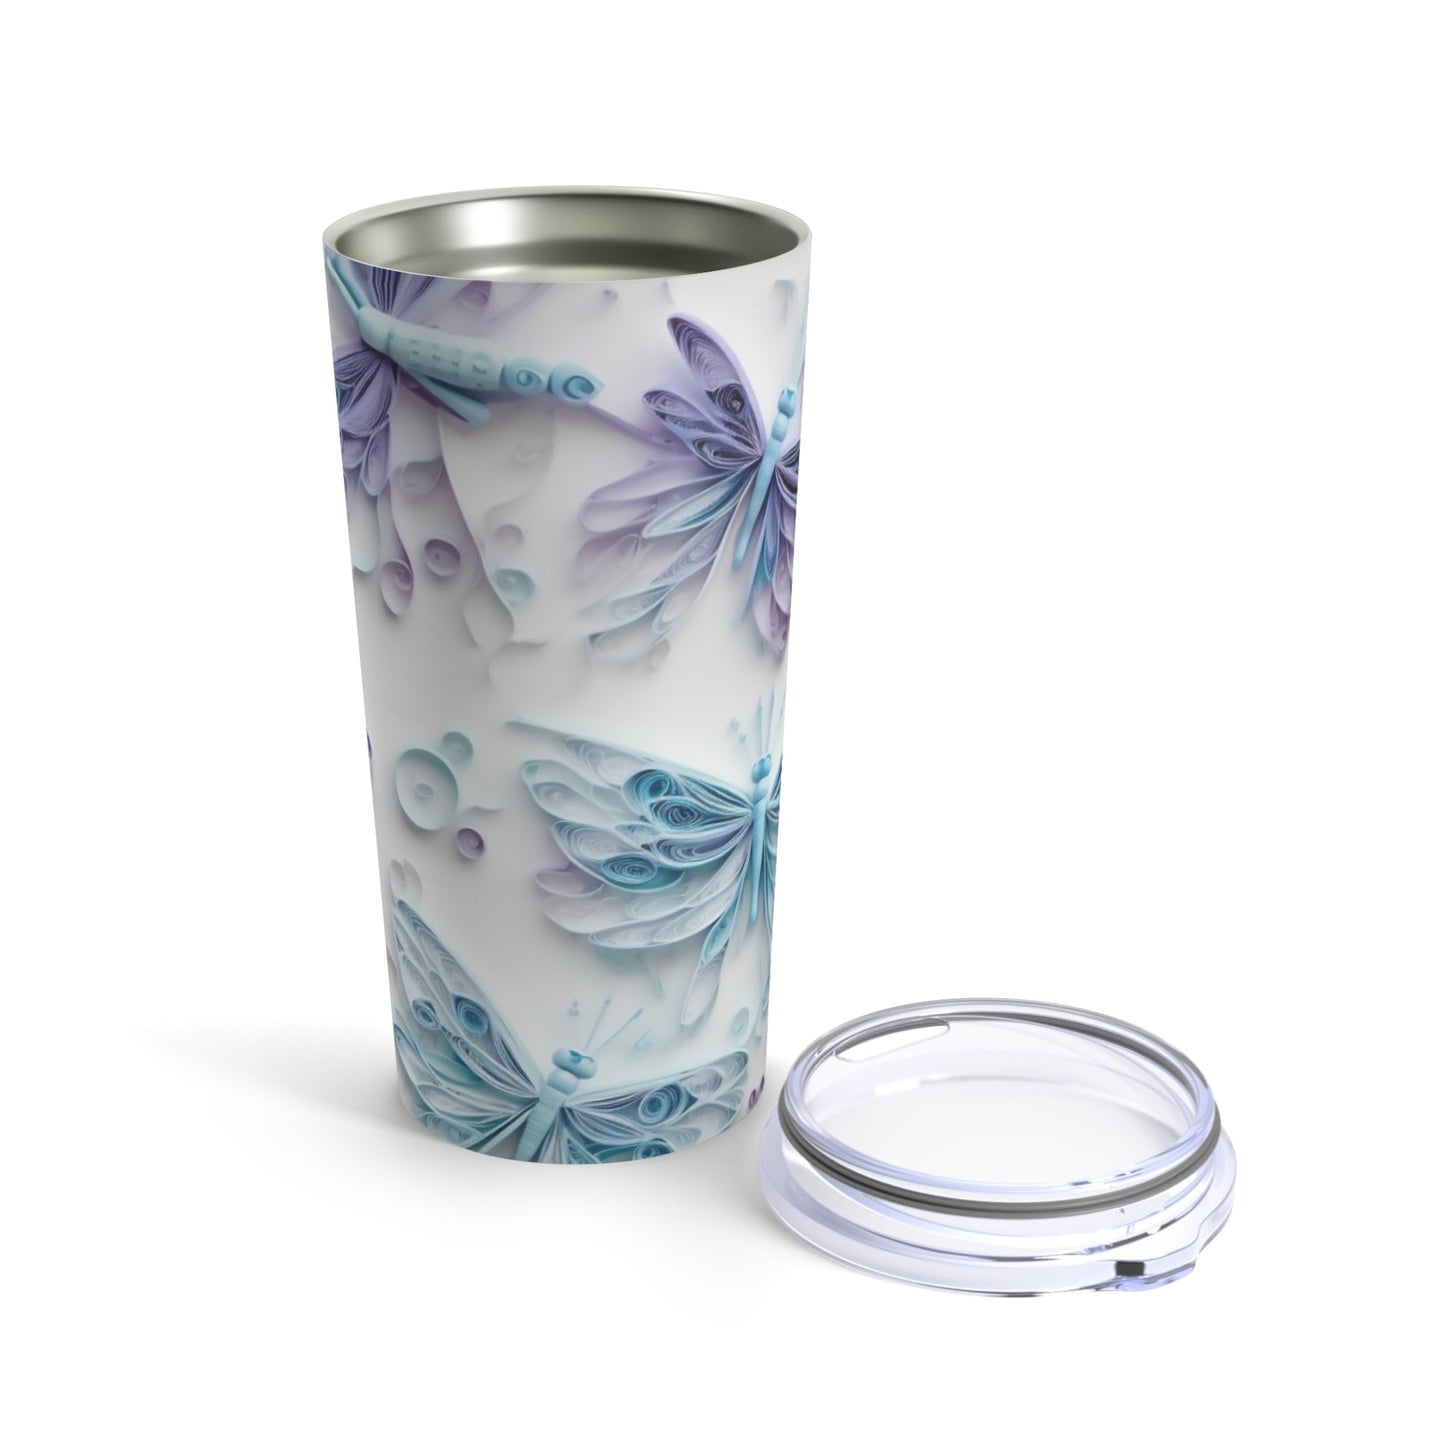 Exquisite Paper Quilled Butterflies - 20oz Tumbler - Great Gift for Her